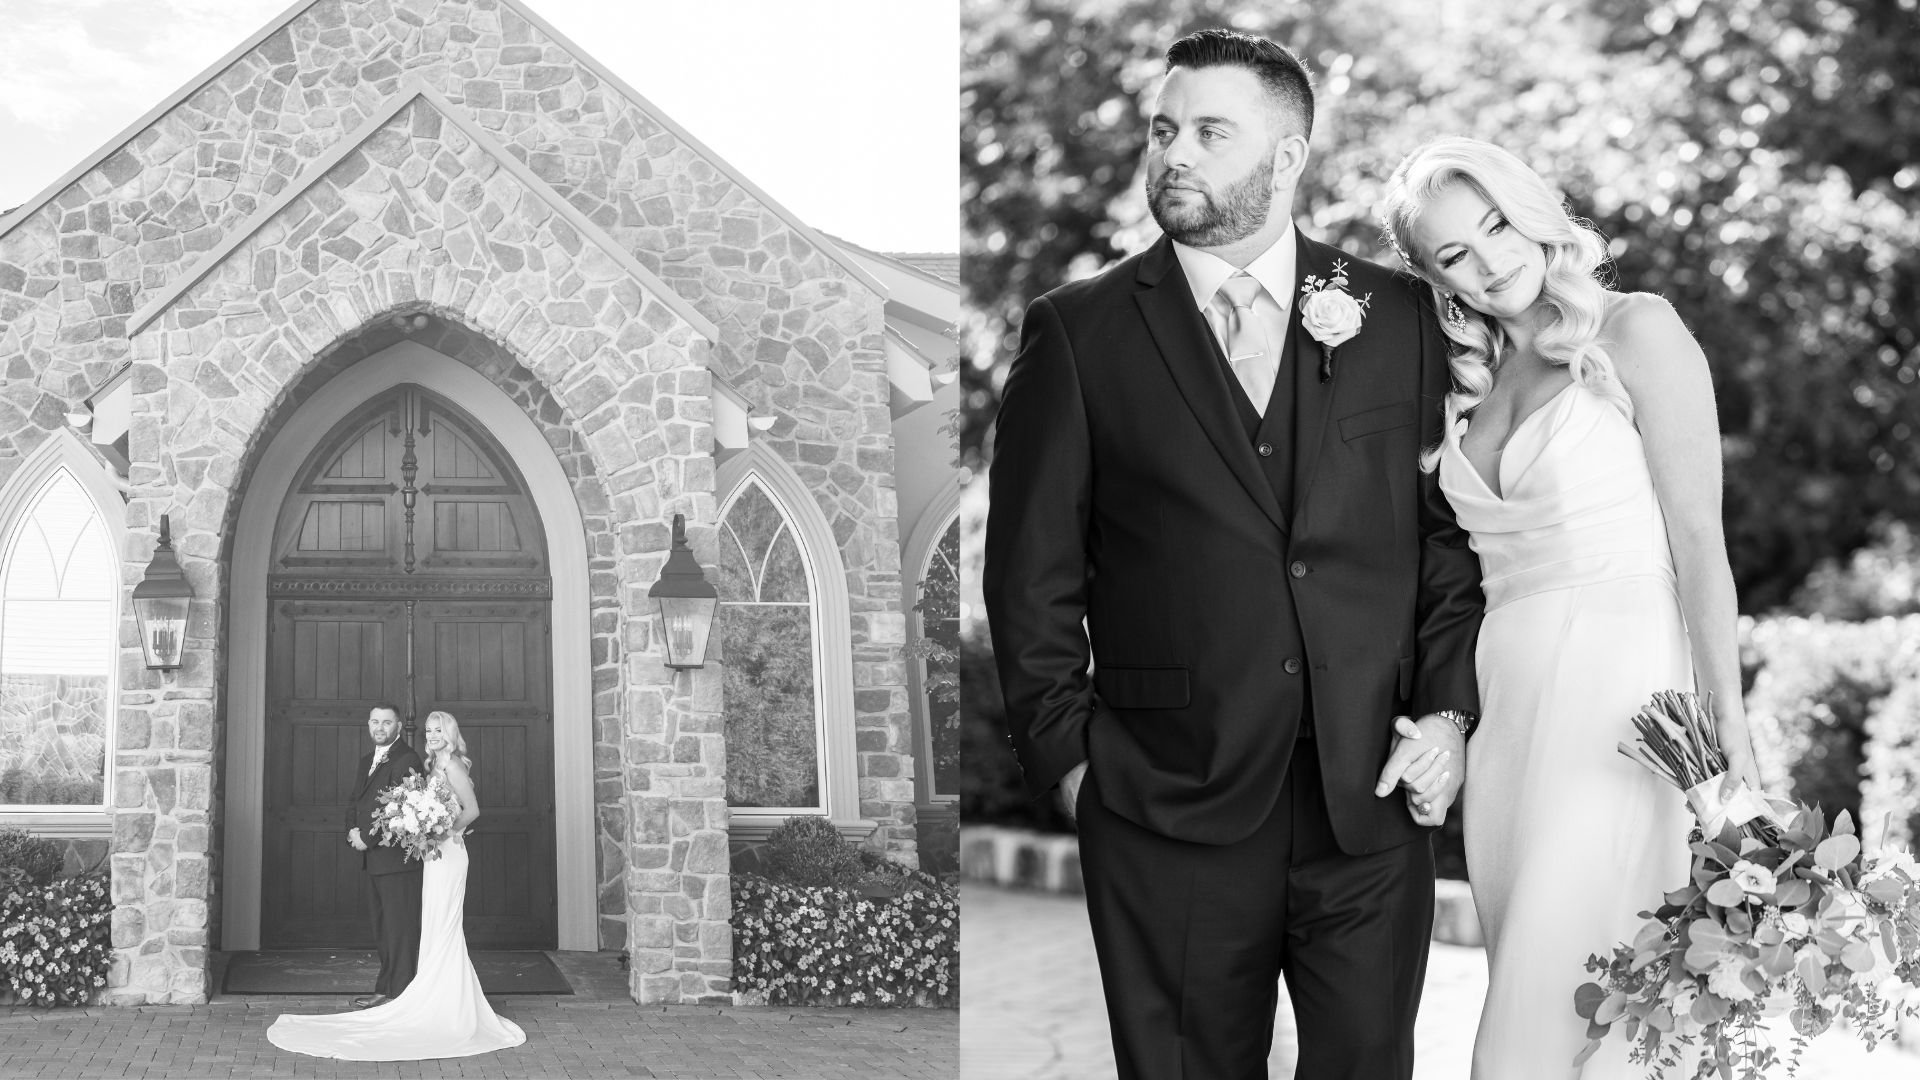  Gangi Photography is a wedding photography business located in Bethlehem PA. Romantic, photojournalistic, creative, timeless, photographs. Specializing in wedding, elopements, and engagement photography.  